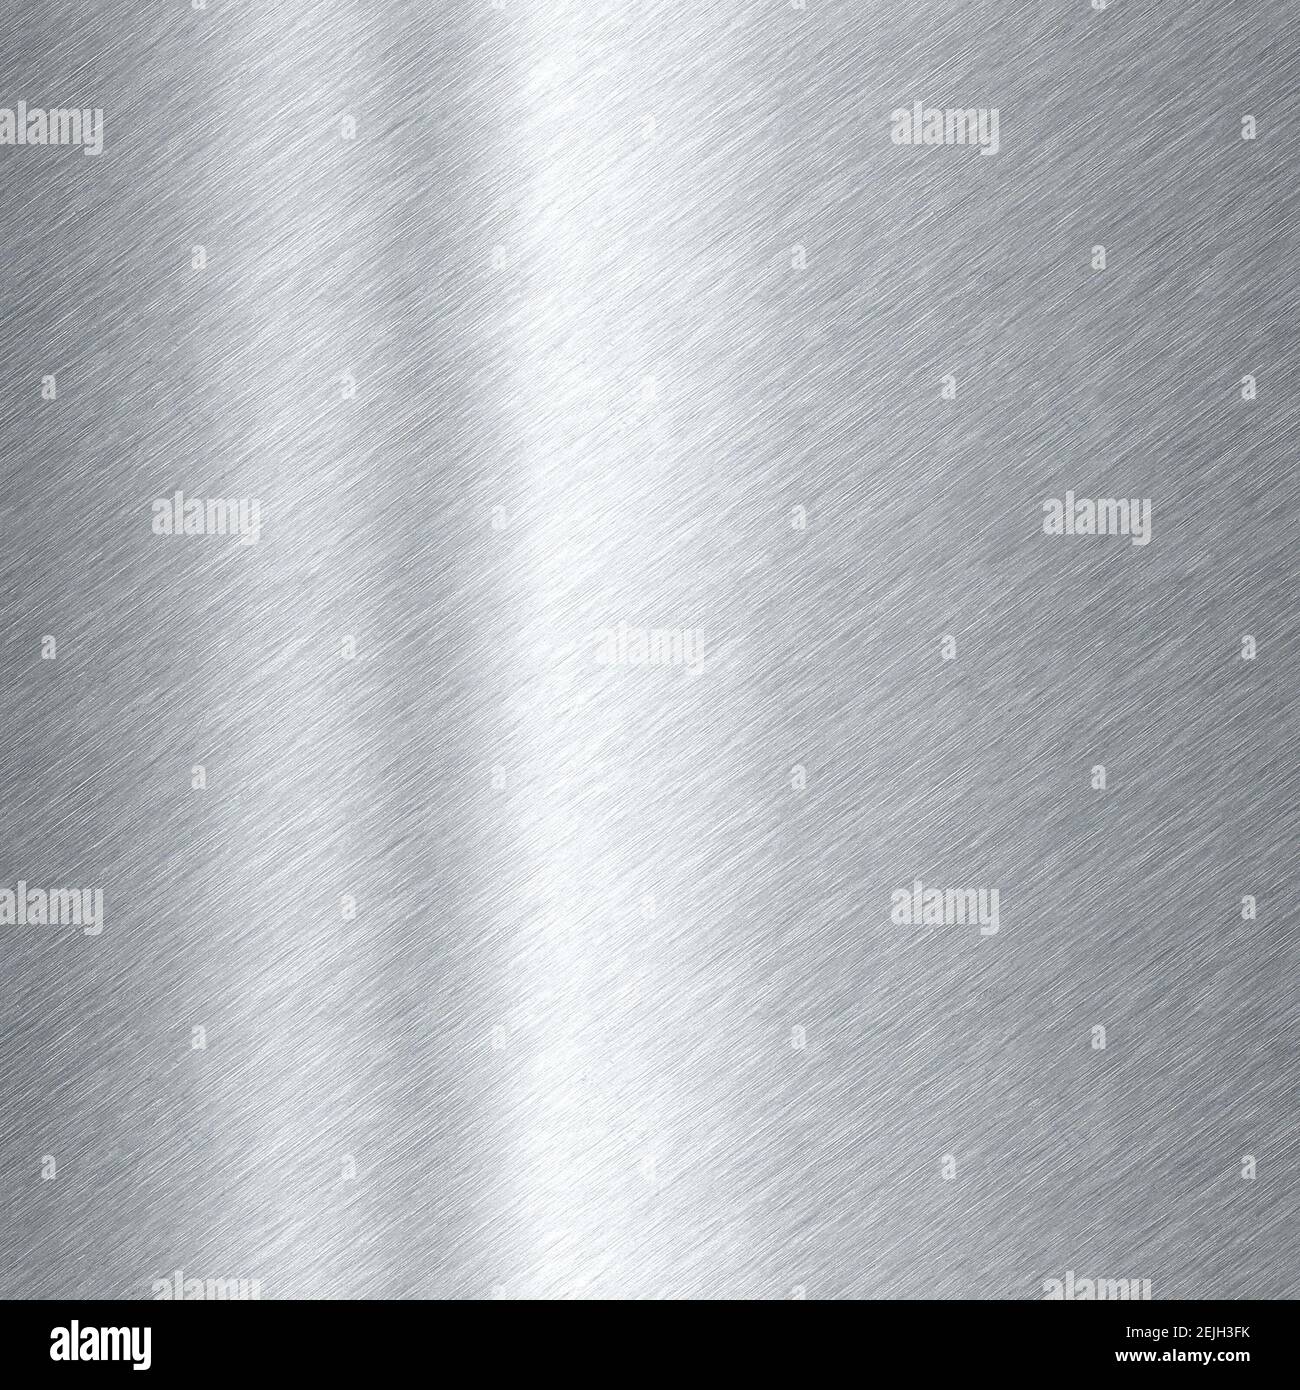 Shiny brushed metal background texture. Polished metallic steel plate.  Sheet metal glossy shiny silver. Seamless texture Stock Photo - Alamy